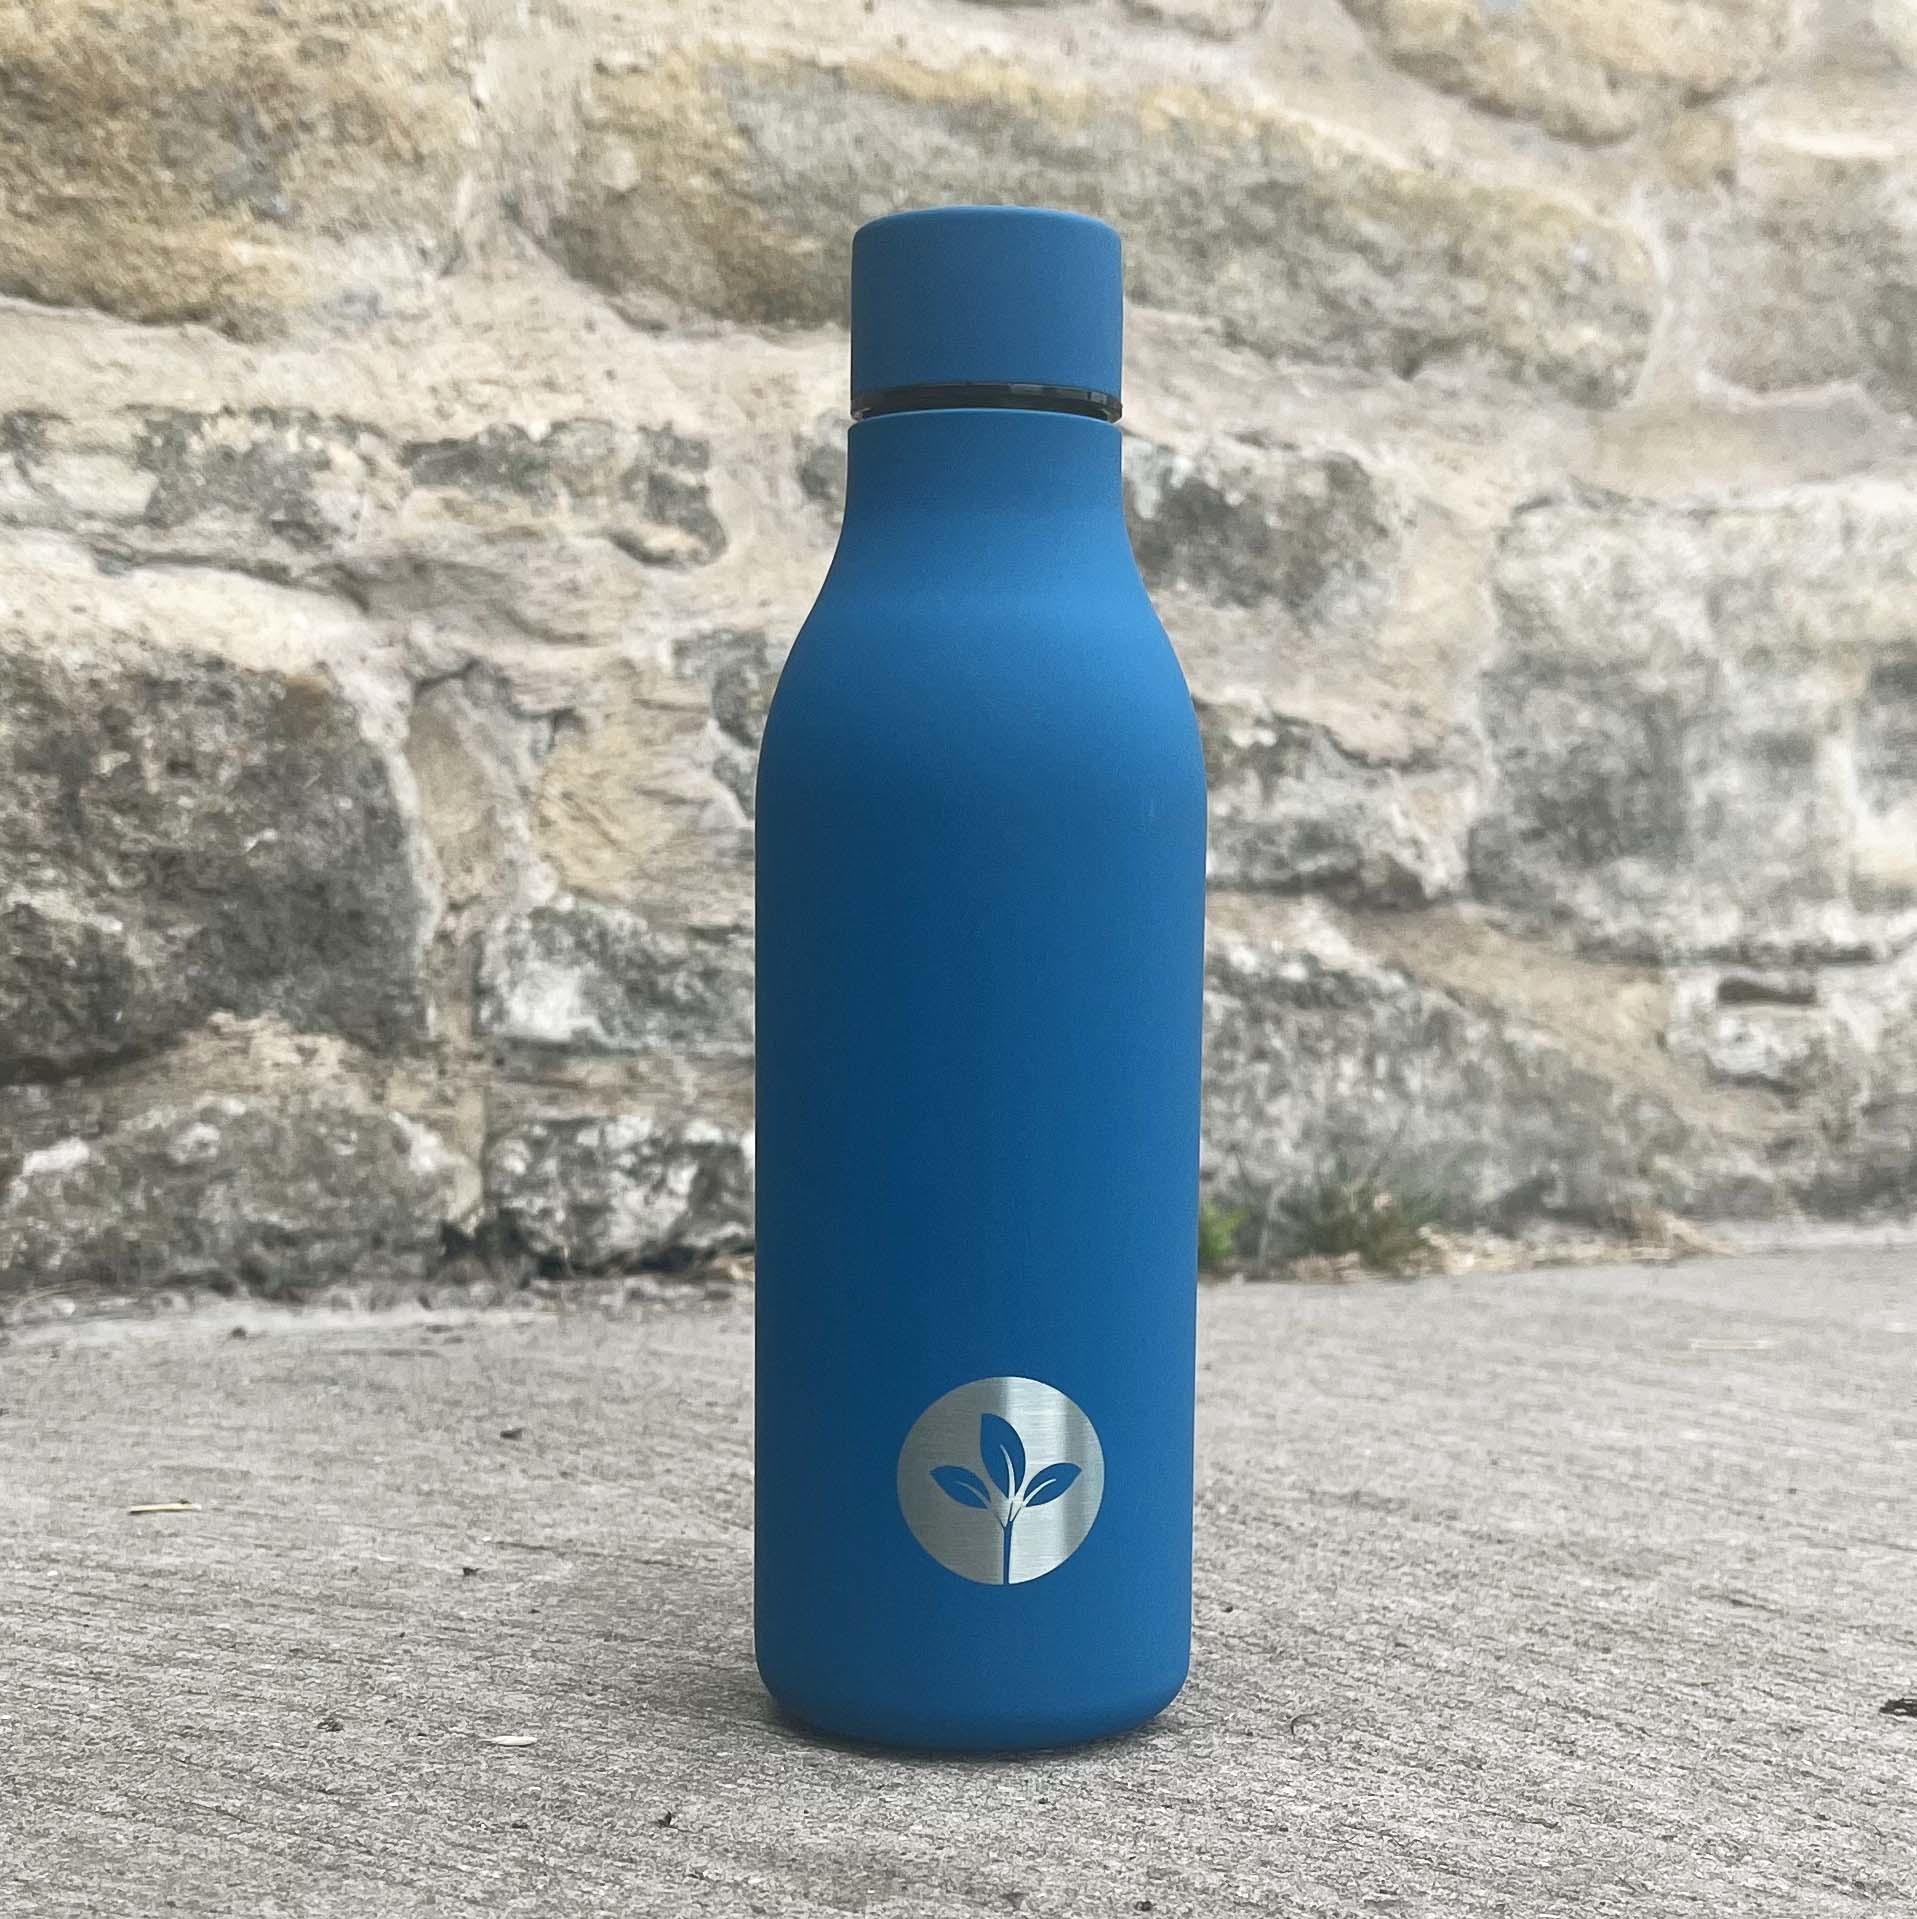 Cherish Planet Soft-Touch Stainless Steel Water Bottle 550ml Blue